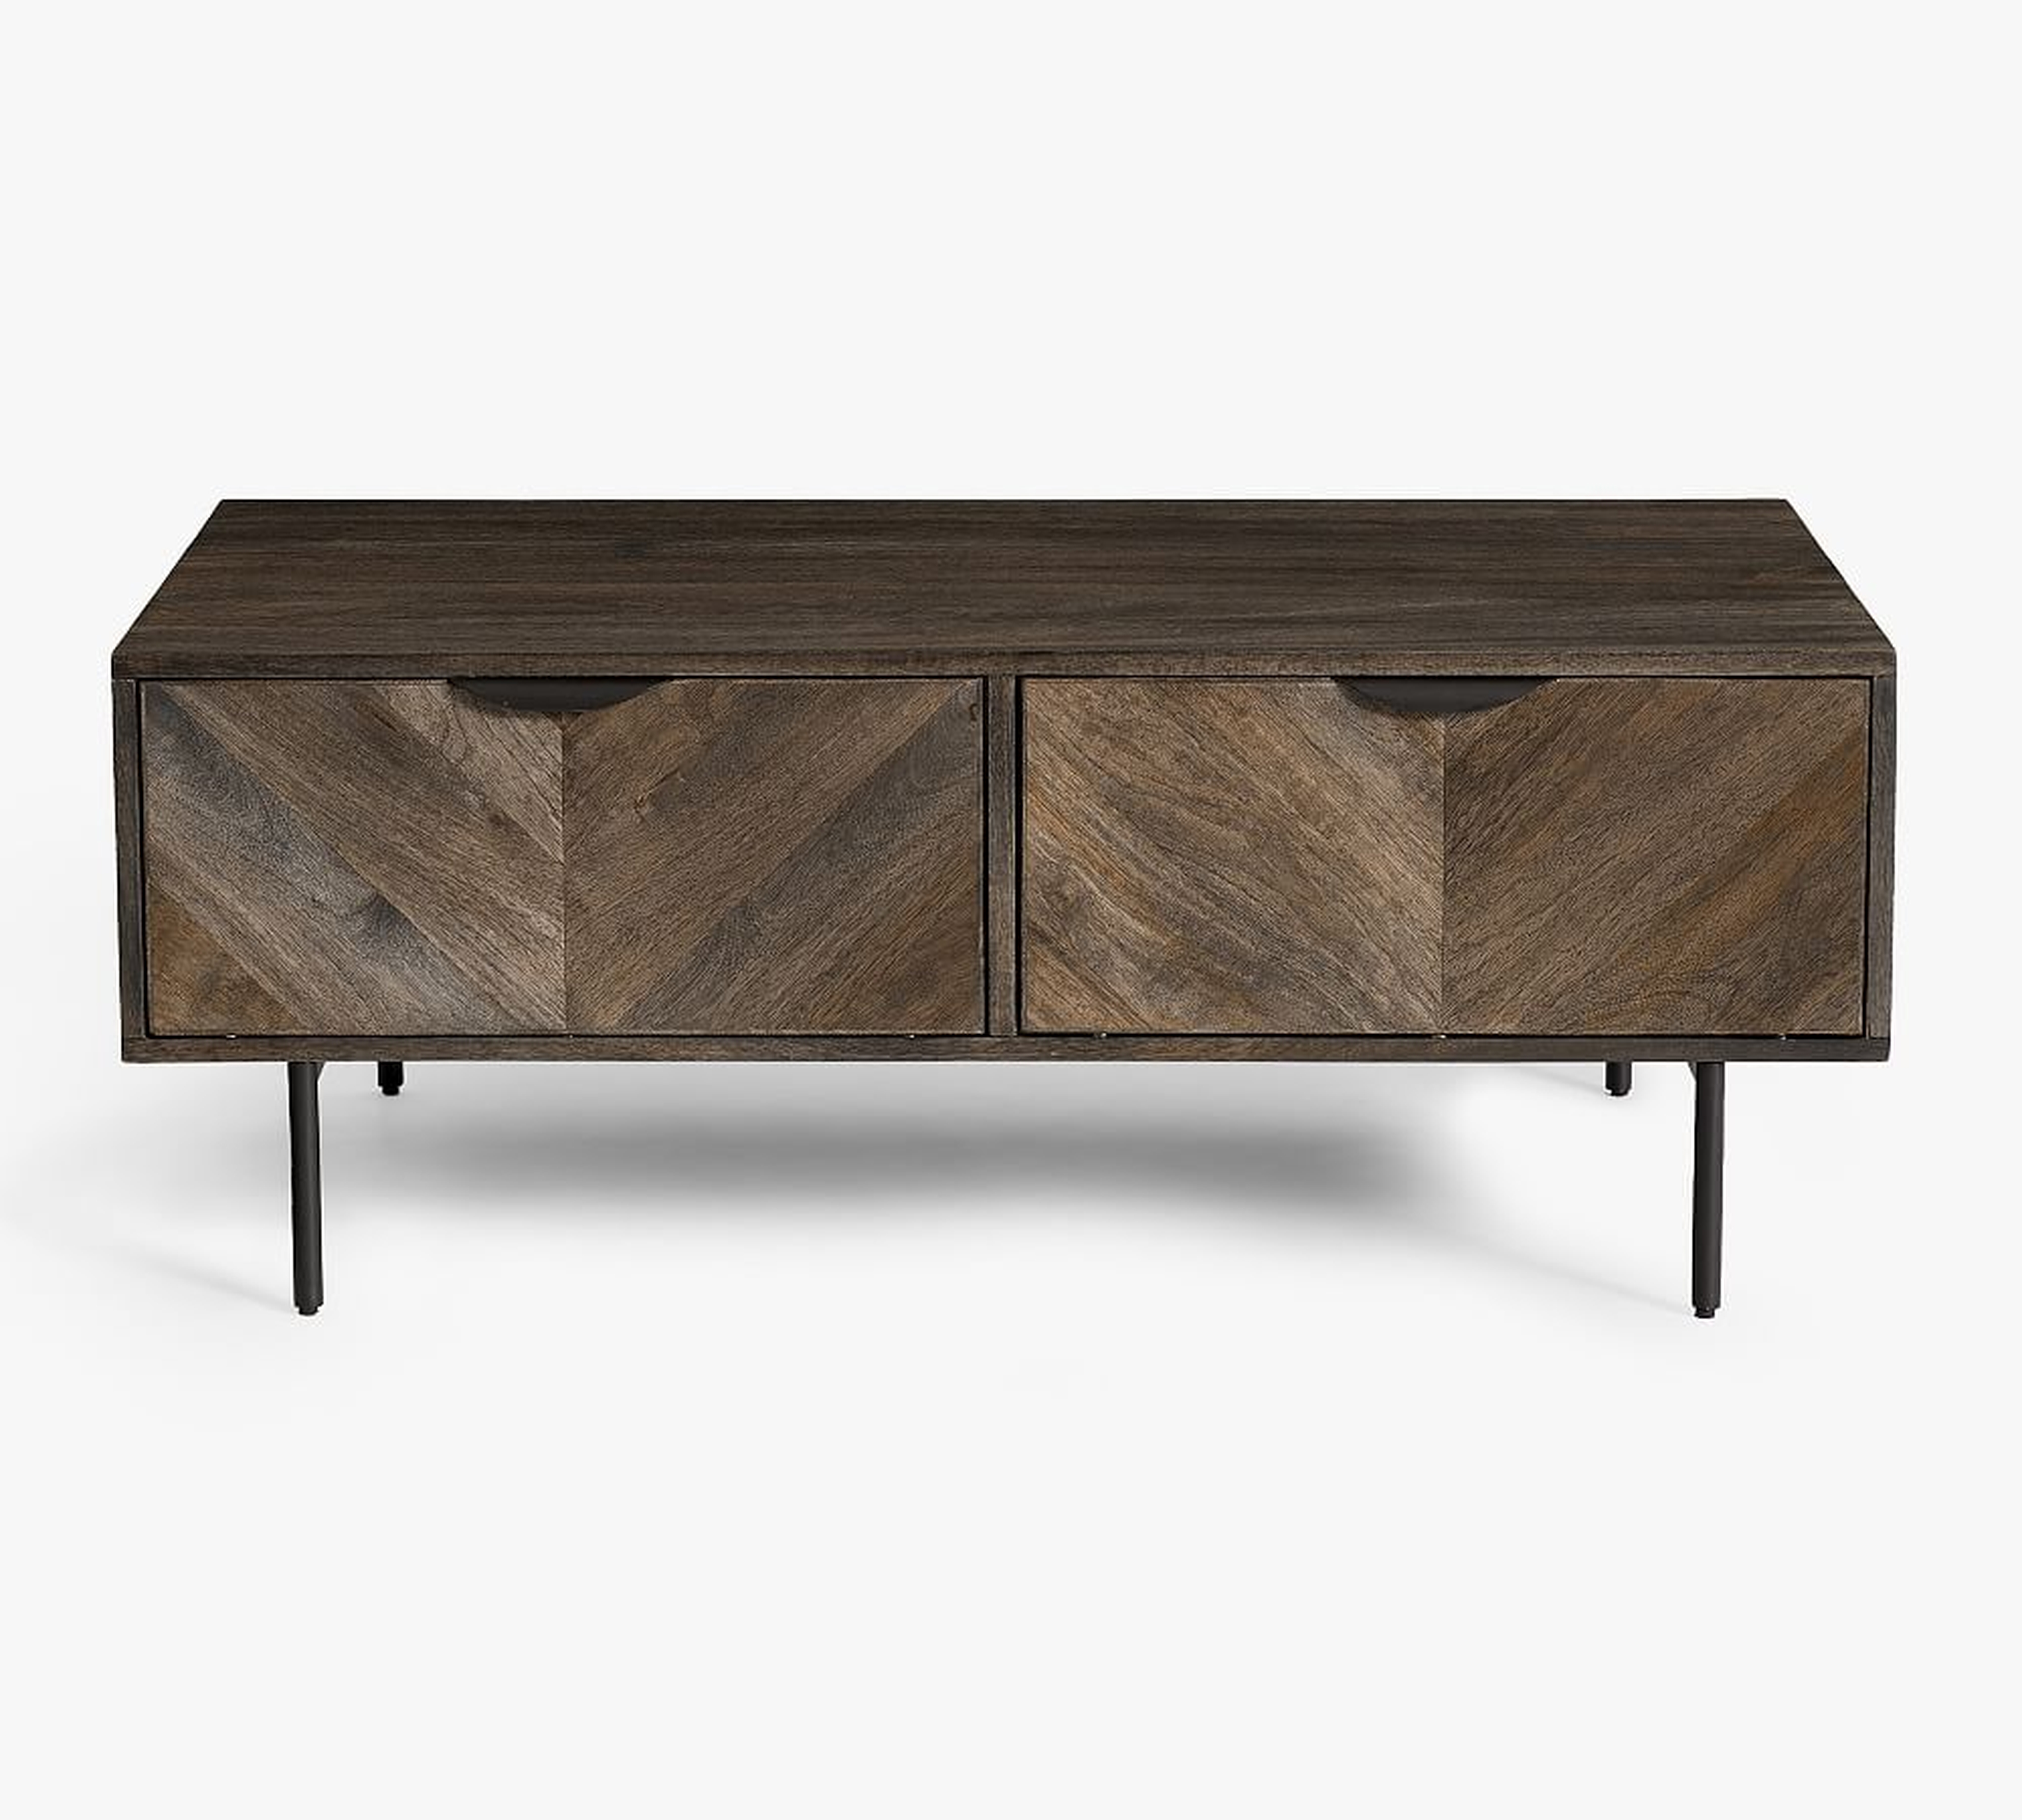 Dayton Wood Coffee Table with Drawers, Chevron Brown, 44" - Pottery Barn